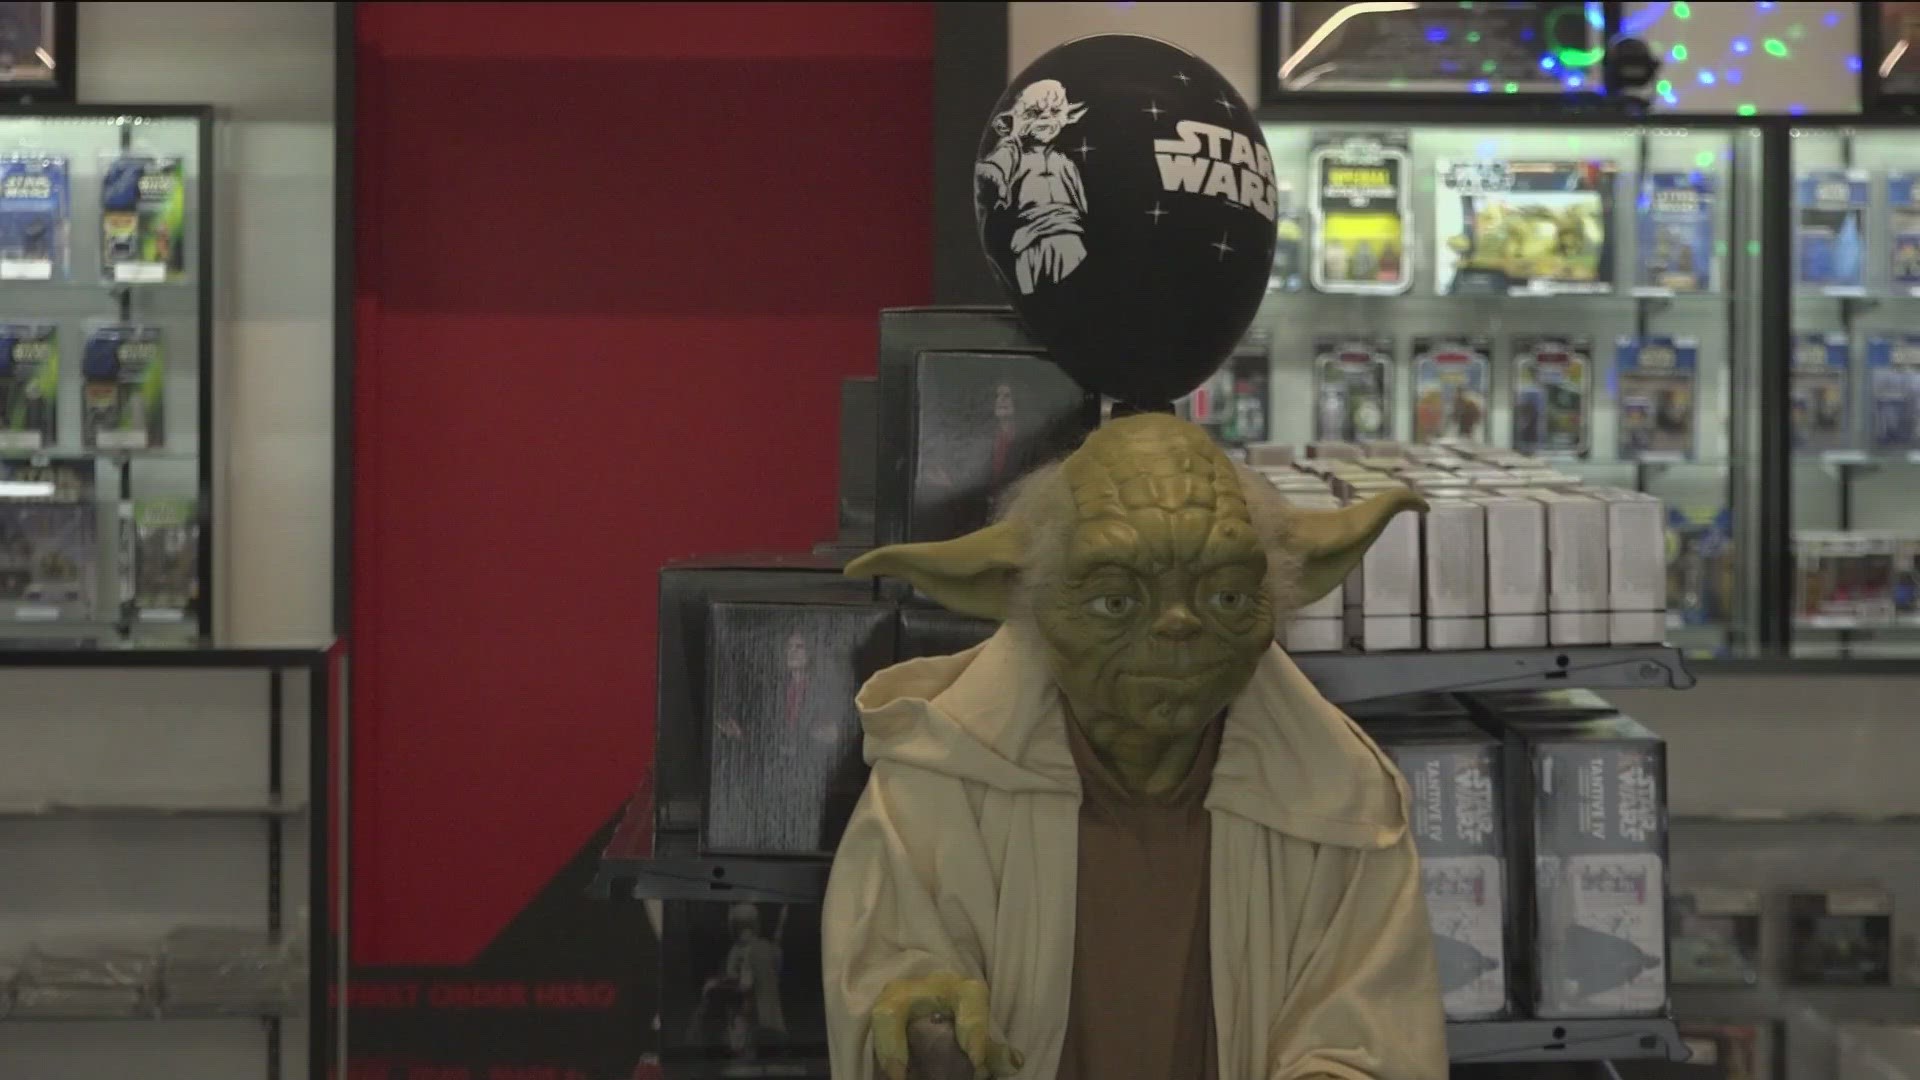 May 4 has unofficially become known as "Star Wars Day." KVUE's Matt Fernandez takes us inside Holocron Toy Store, one of the largest "Star Wars" stores in the U.S..